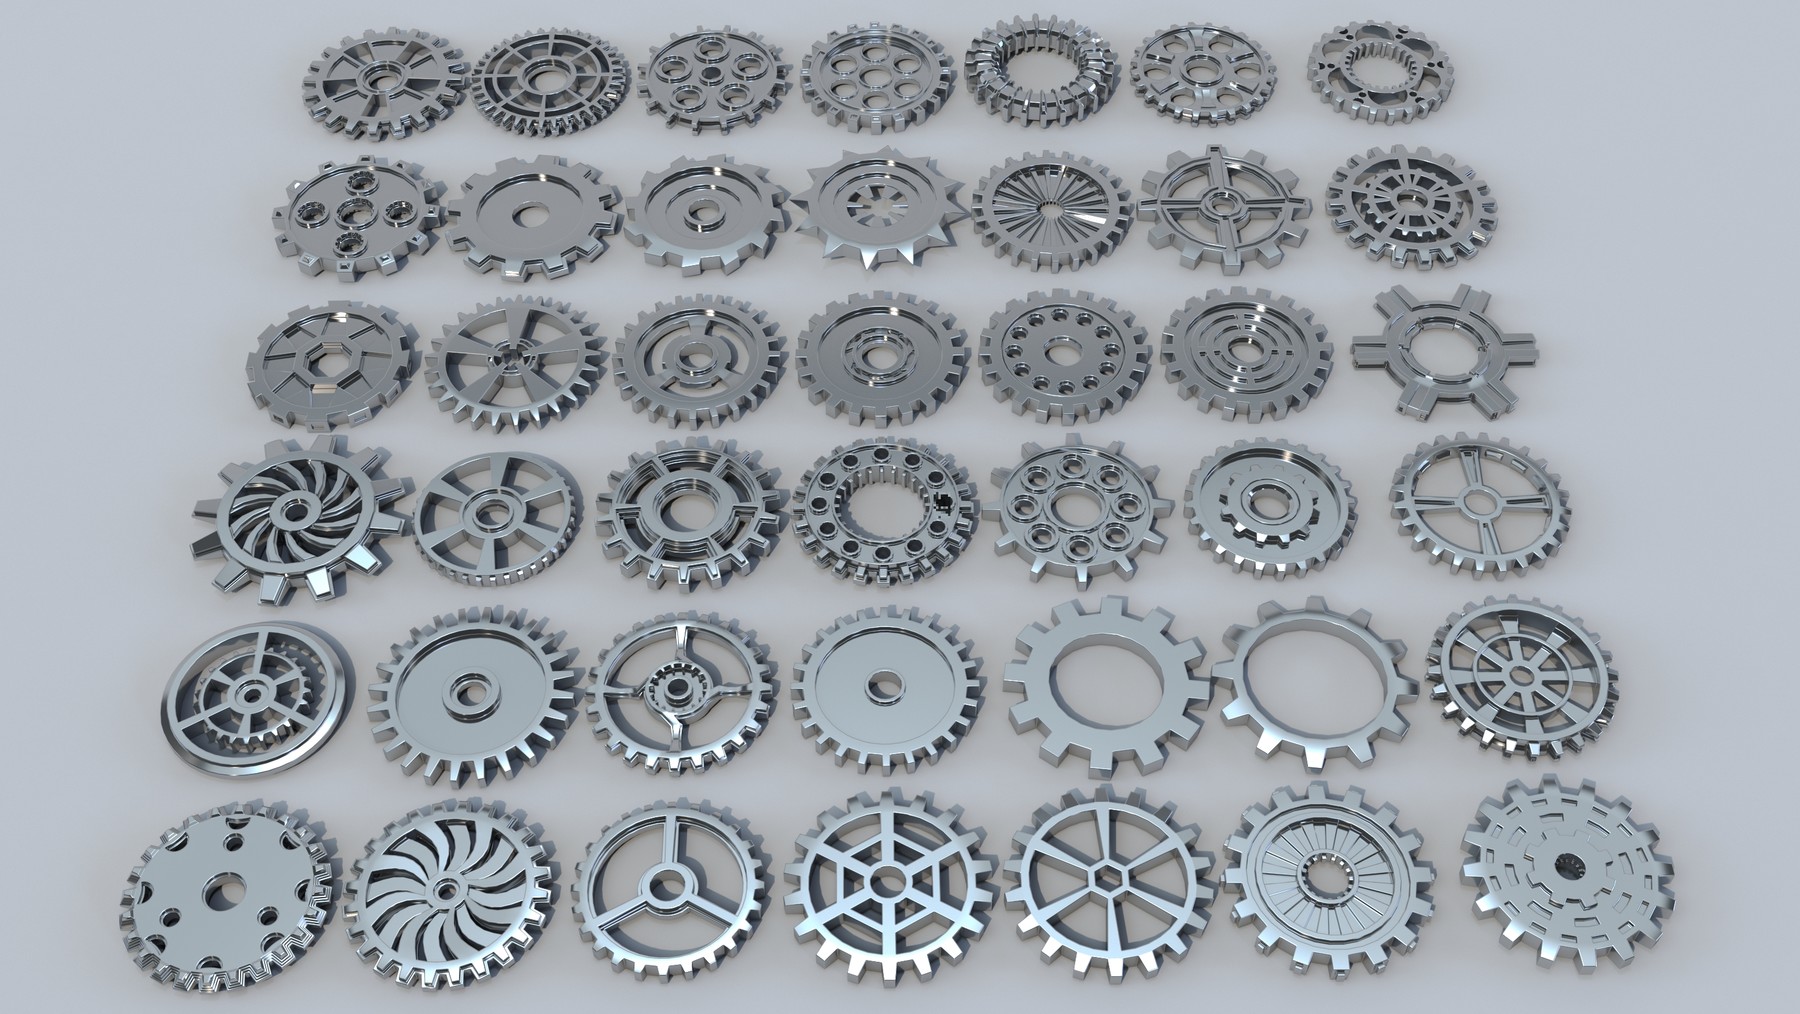 42 low poly gears - 3D model by 3d.armzep (@3d.armzep) [73c4a19]